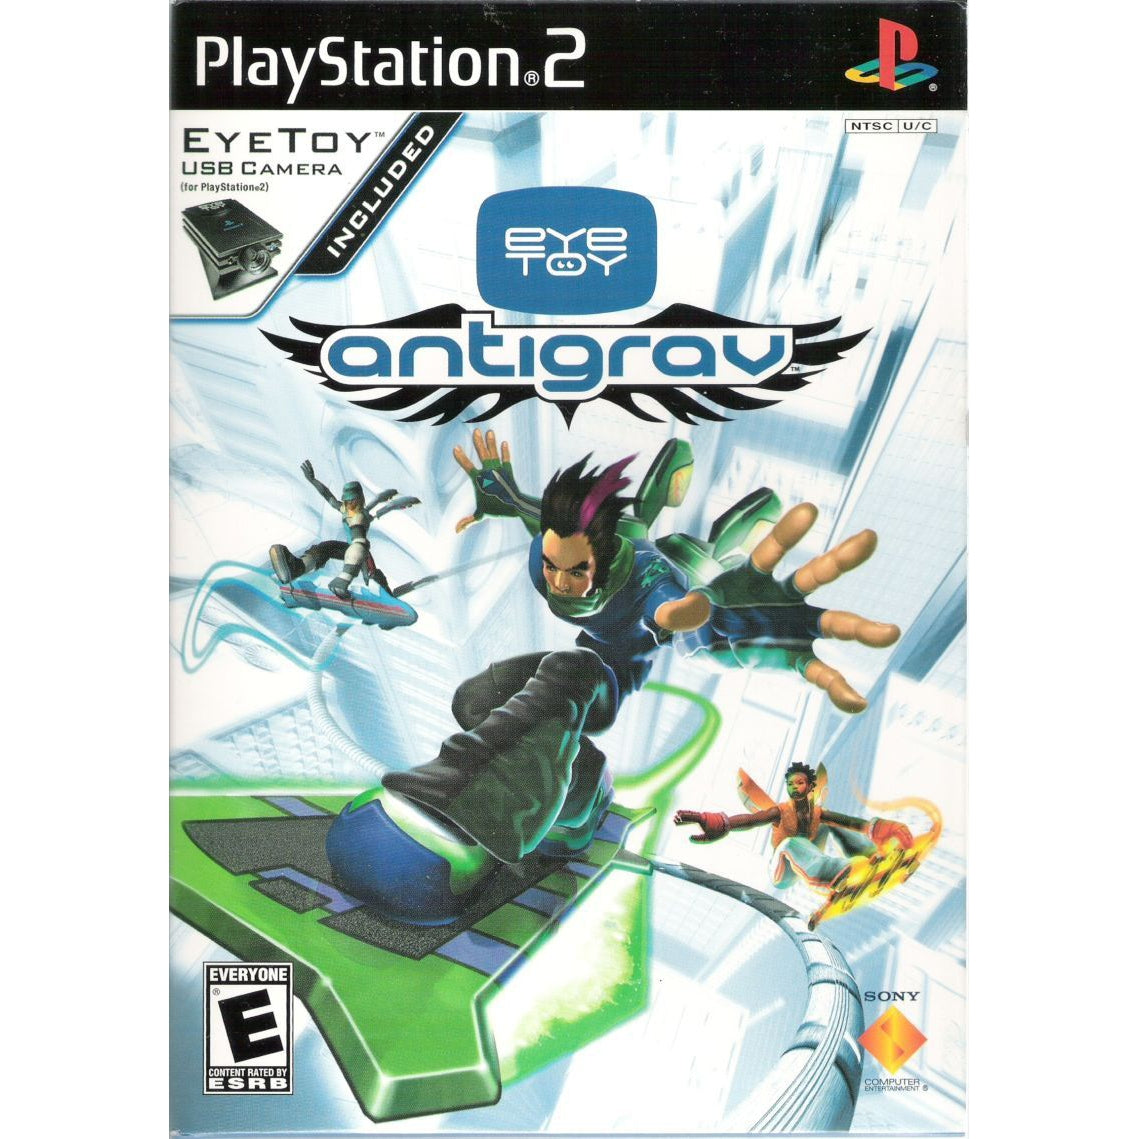 EyeToy: AntiGrav - PlayStation 2 (PS2) Game Complete - YourGamingShop.com - Buy, Sell, Trade Video Games Online. 120 Day Warranty. Satisfaction Guaranteed.